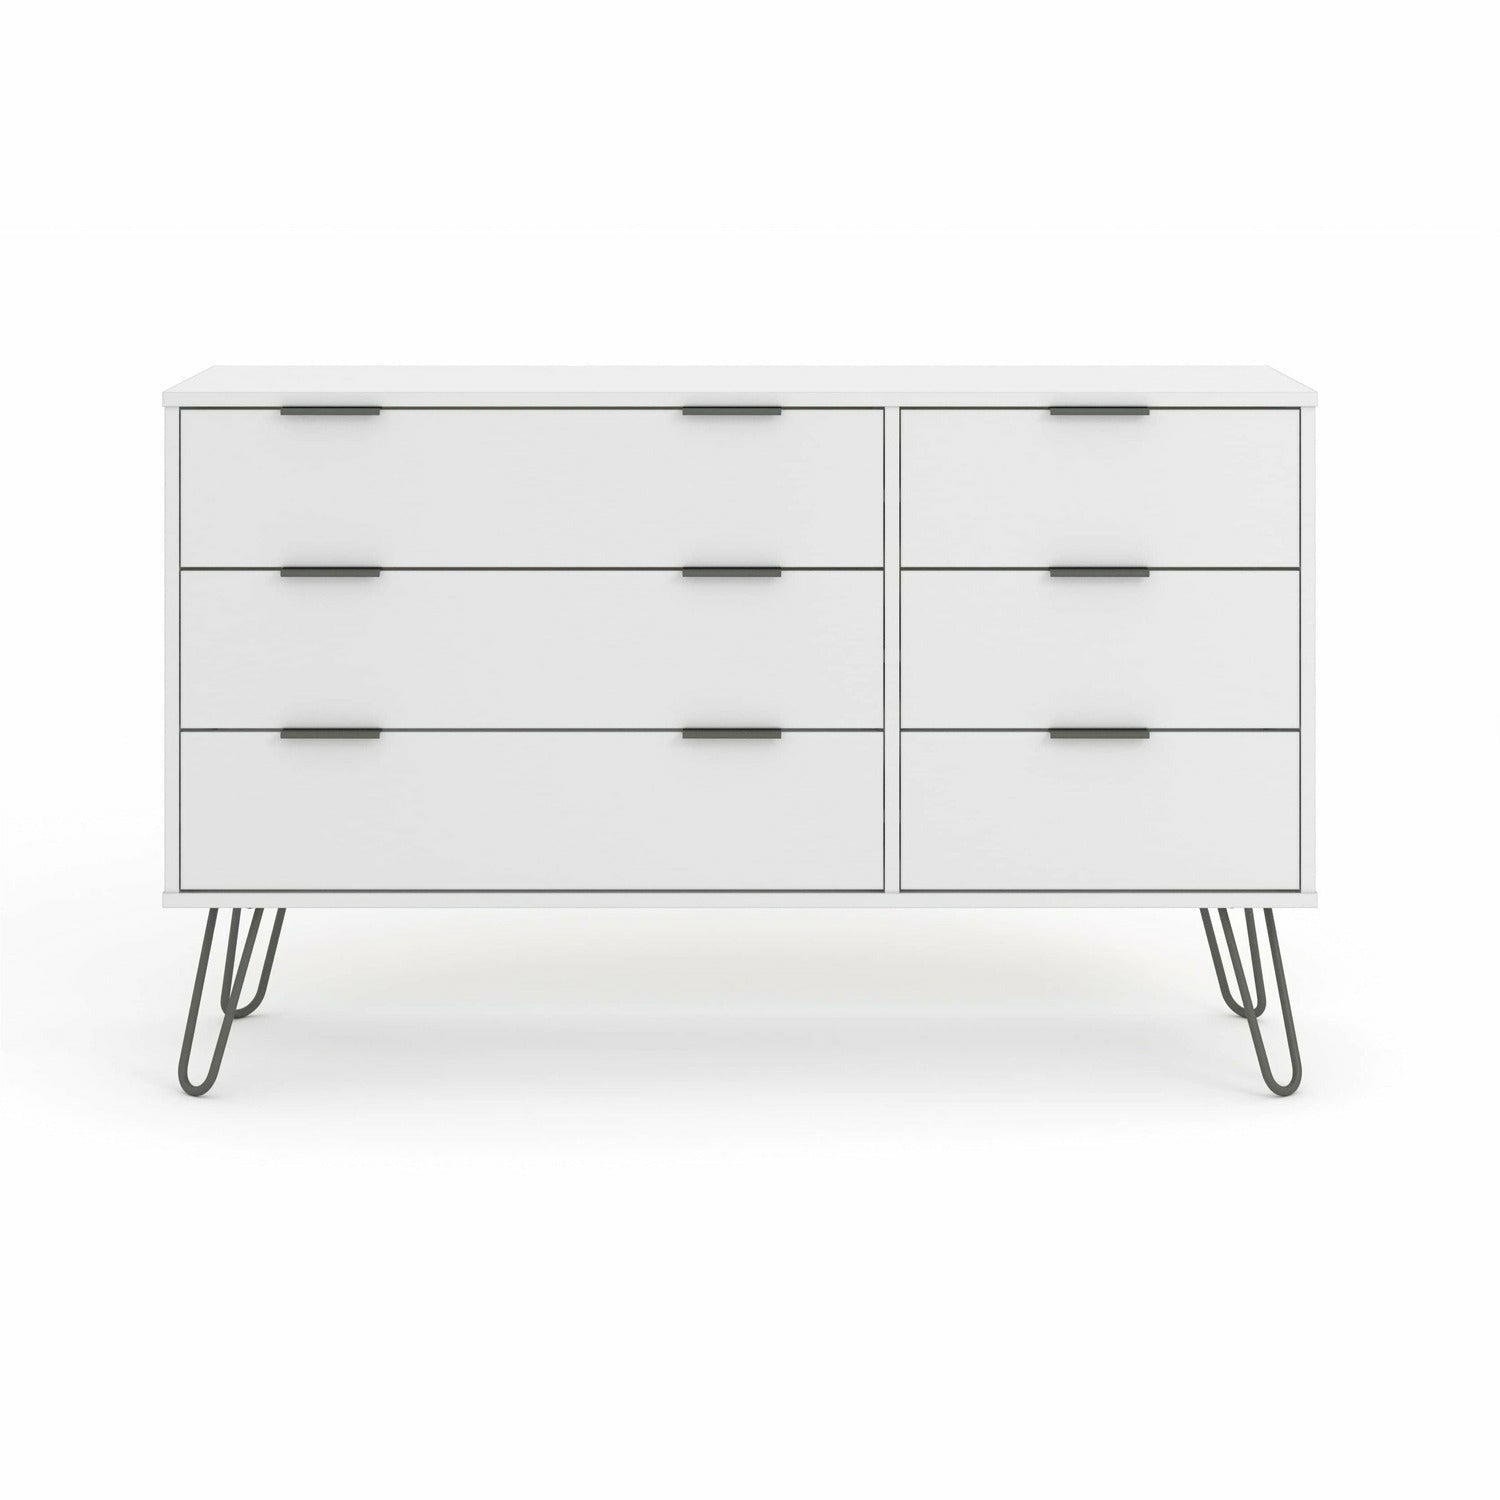 Augusta White 3+3 Drawer Wide Chest Of Drawers